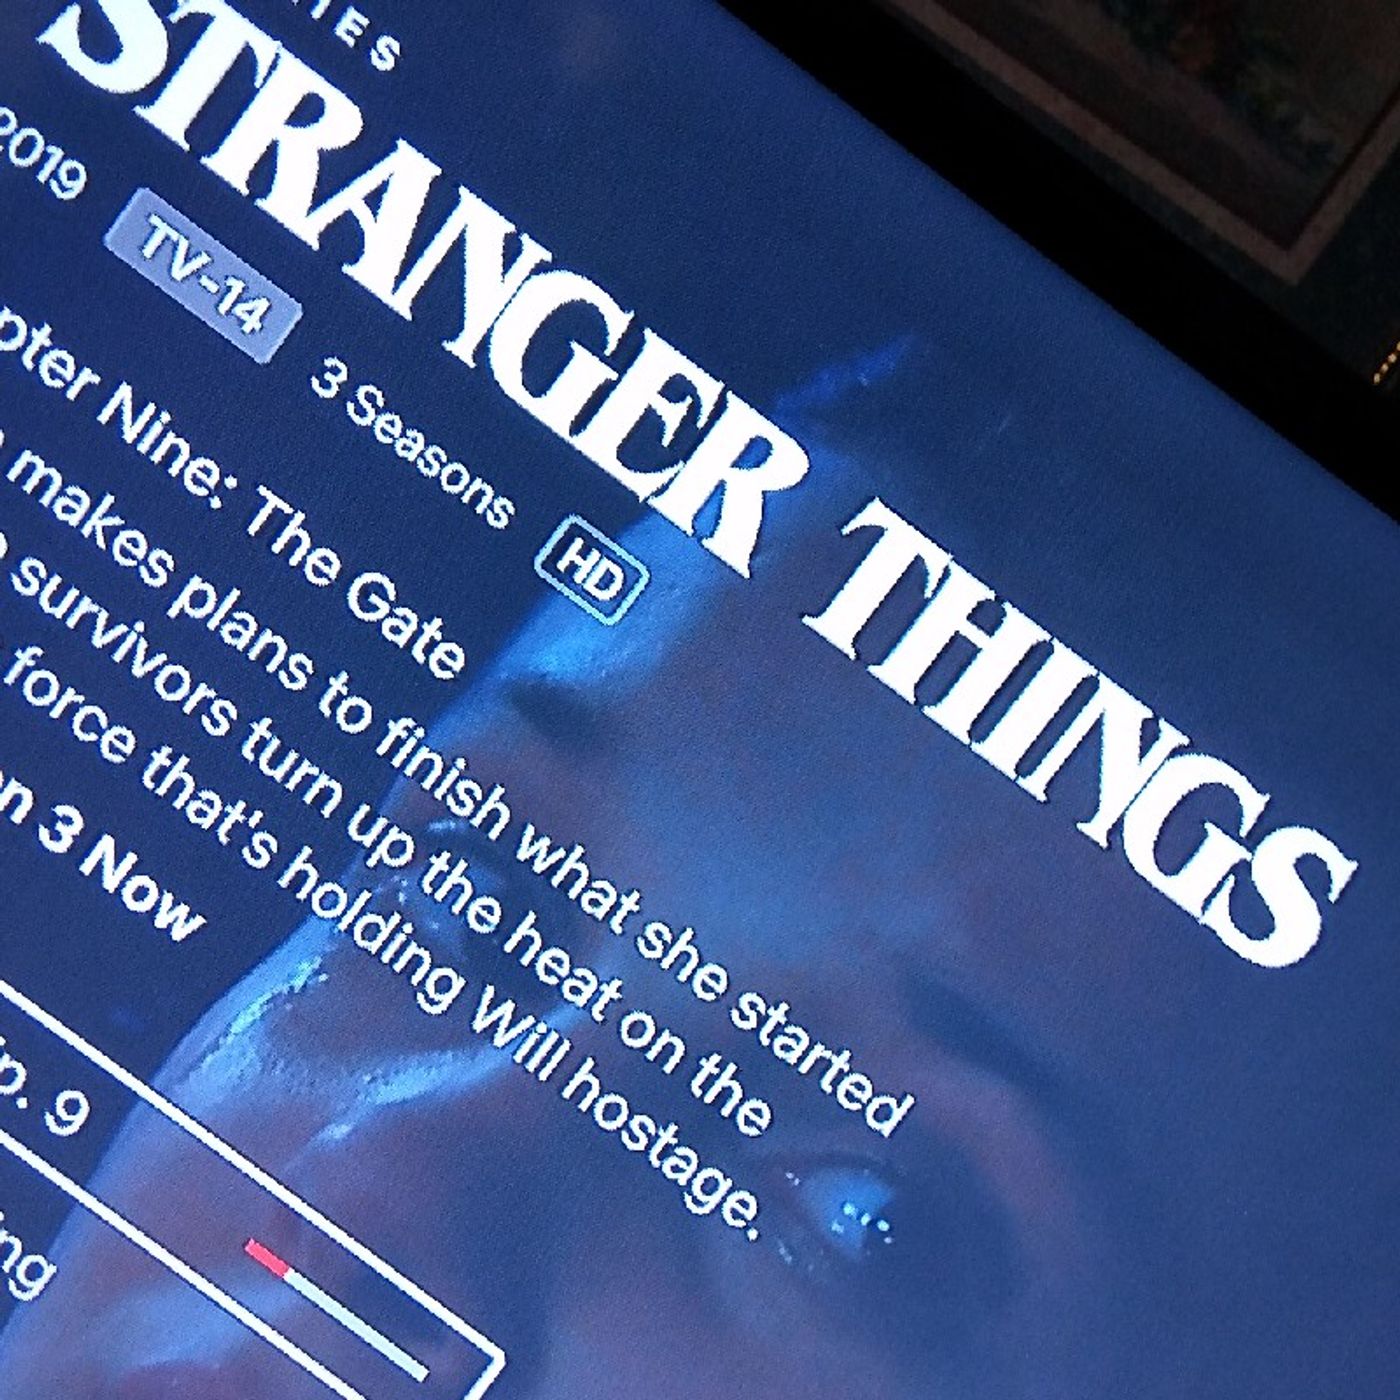 STRANGER THINGS ///QotD/// Talking About The S T R A N G E S T THINGS pt. 1?